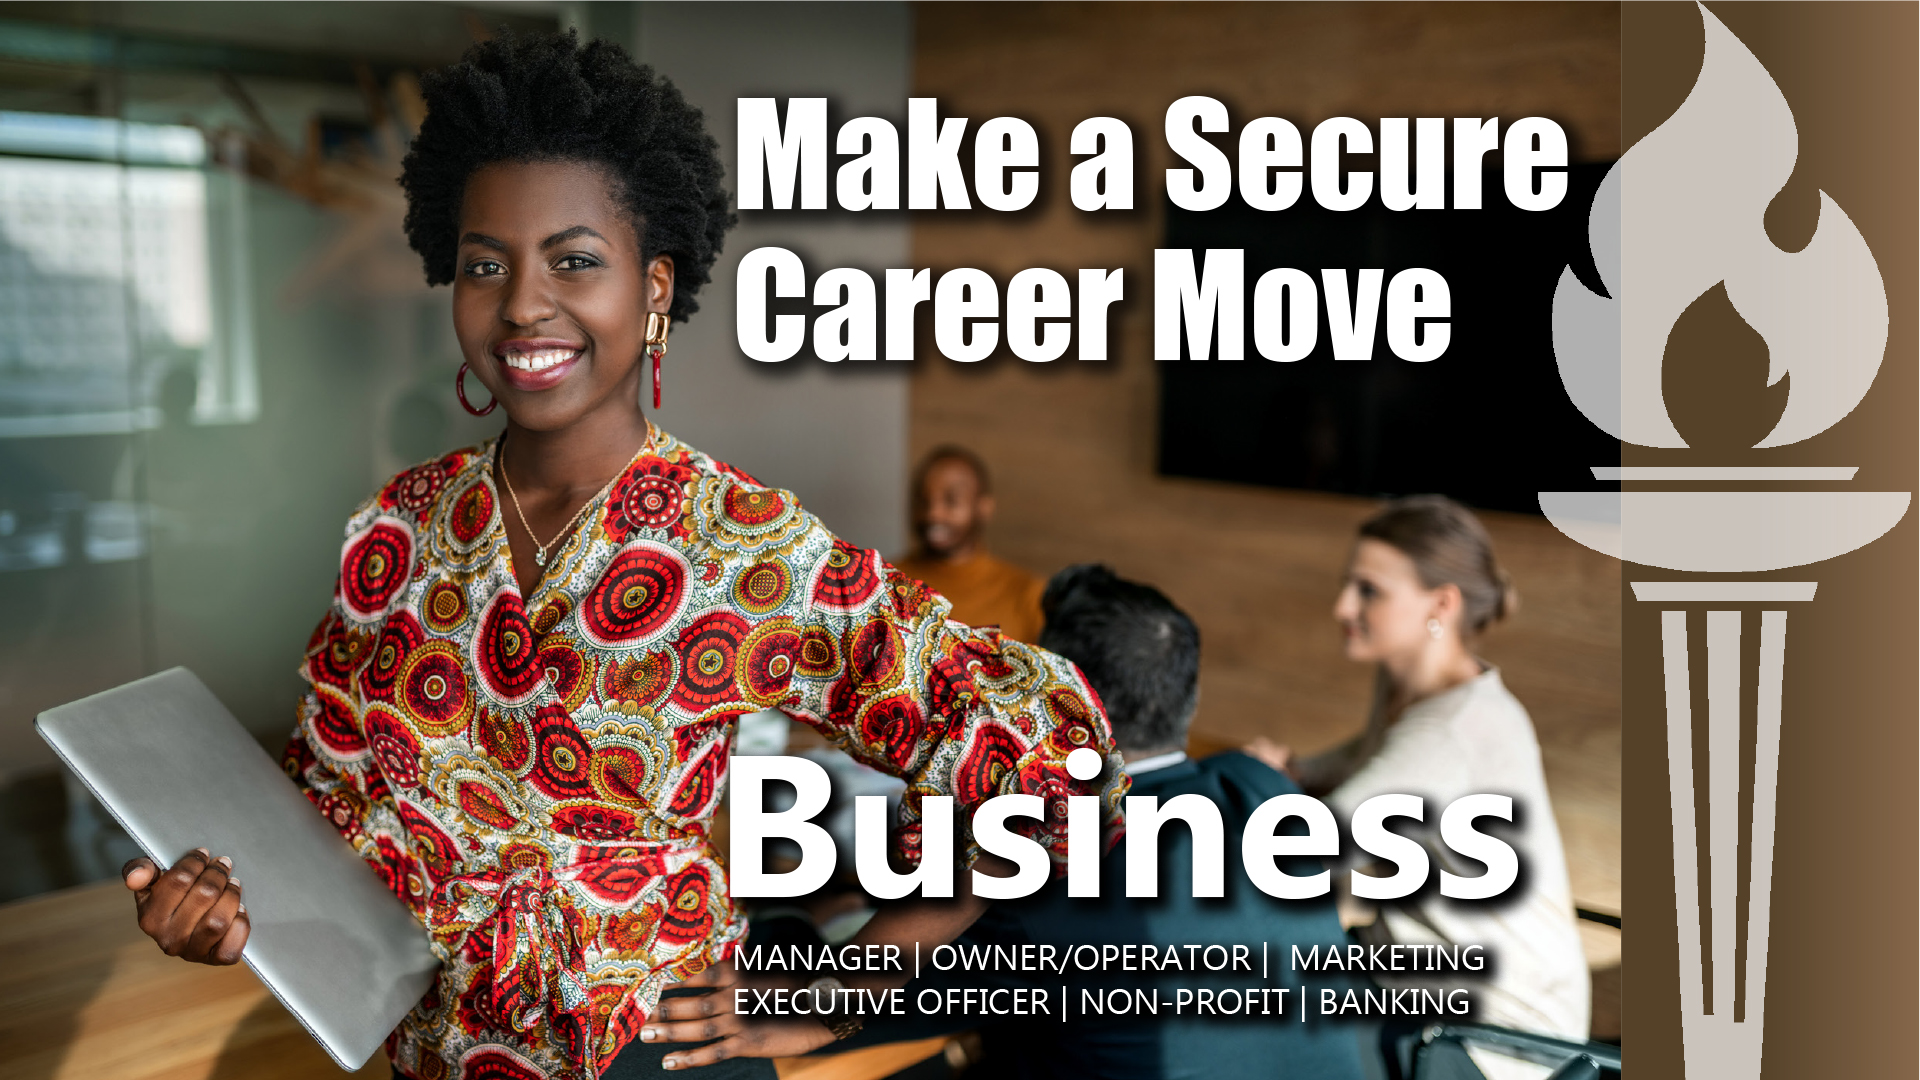 Make a Secure Career Move - Business Administration